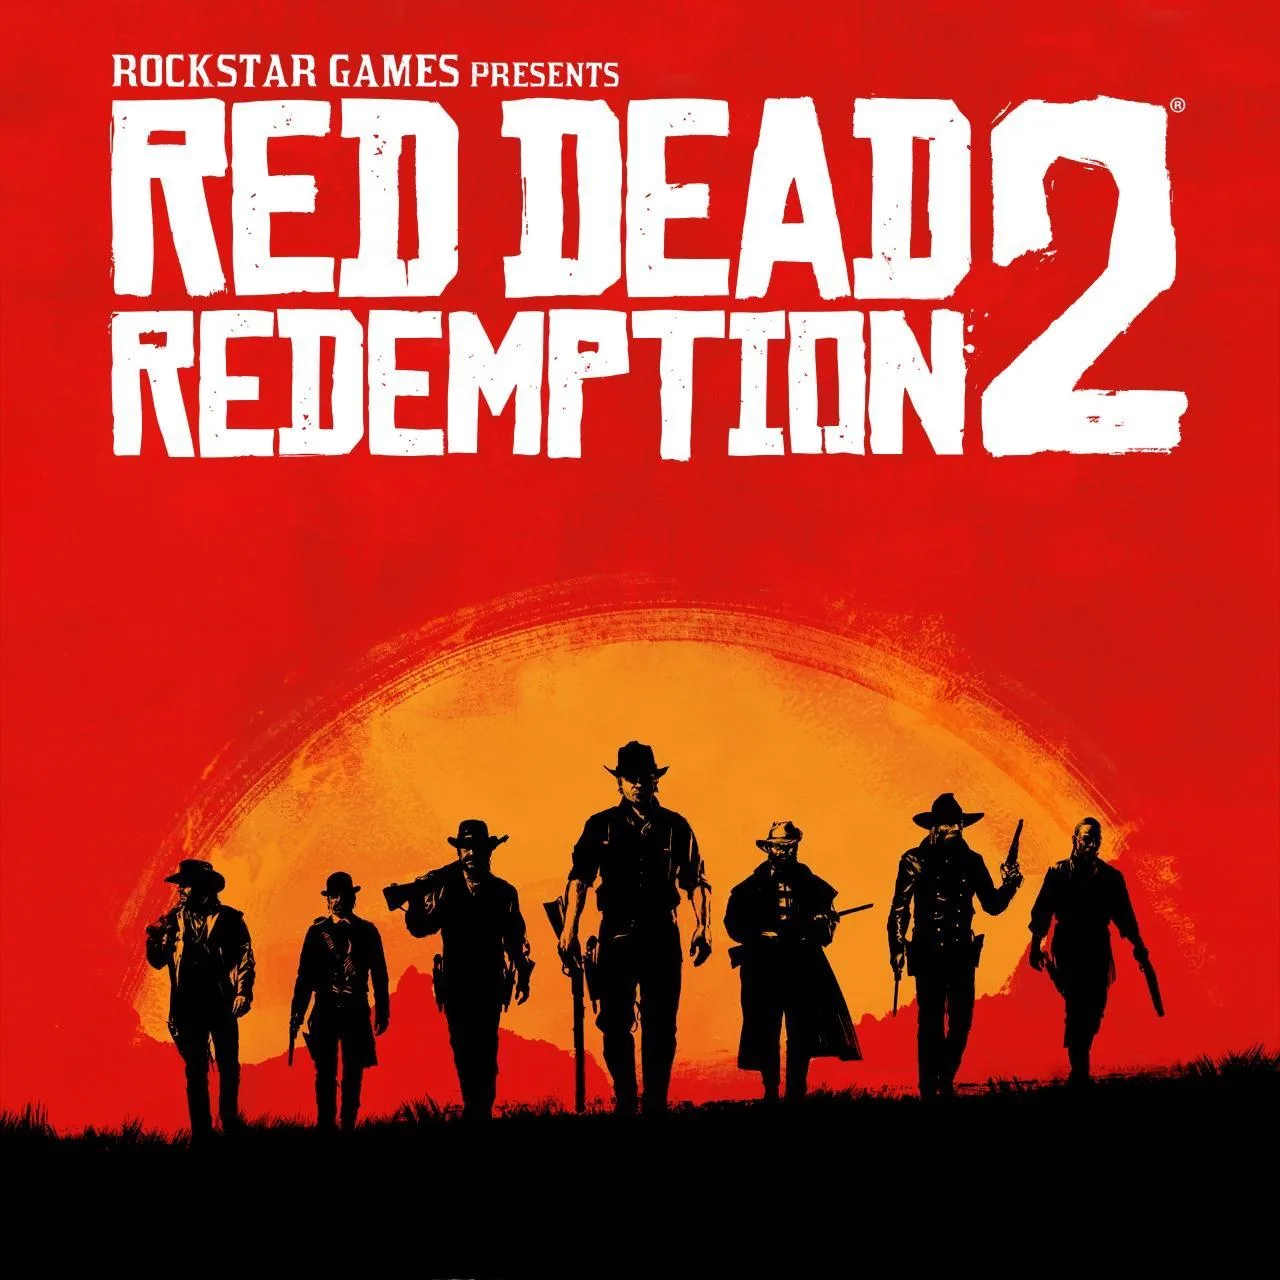 How to fix ERR GFX STATE in Red Dead Redemption 2 